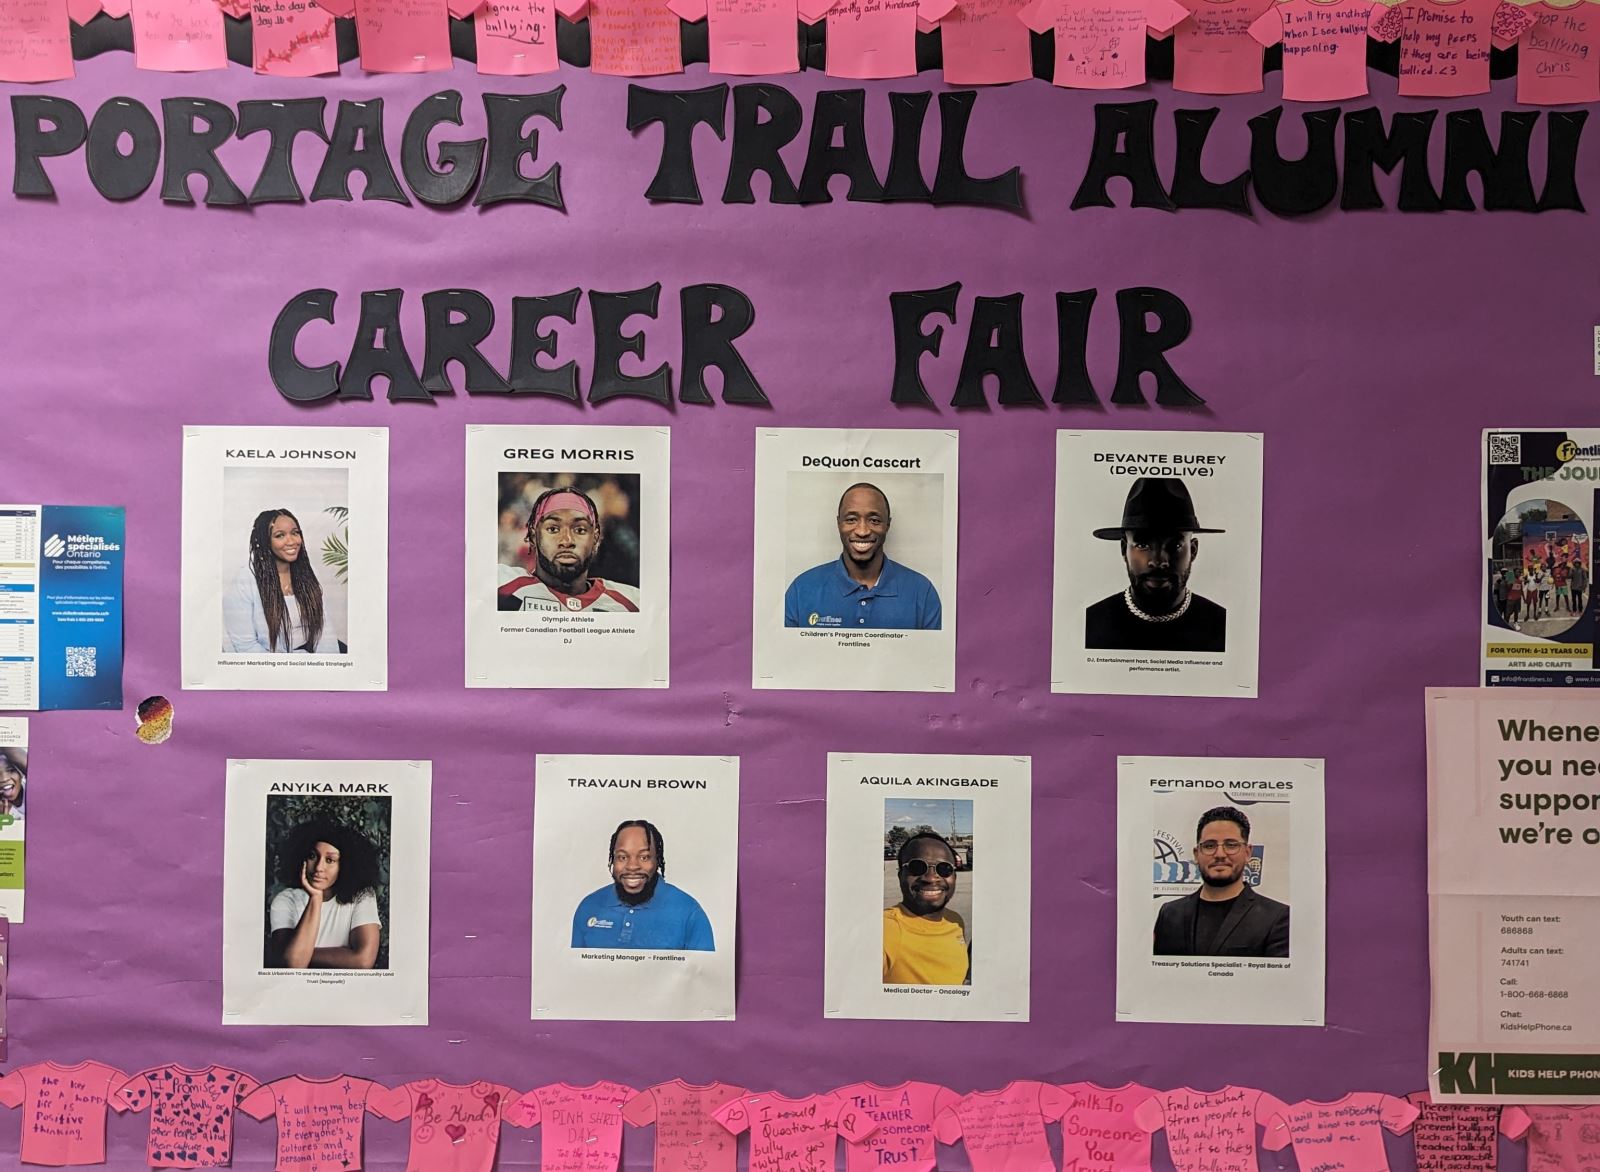 Bulletin board advertising the Portage Trail Community School Alumni Career Fair featuring the list of guest speakers.